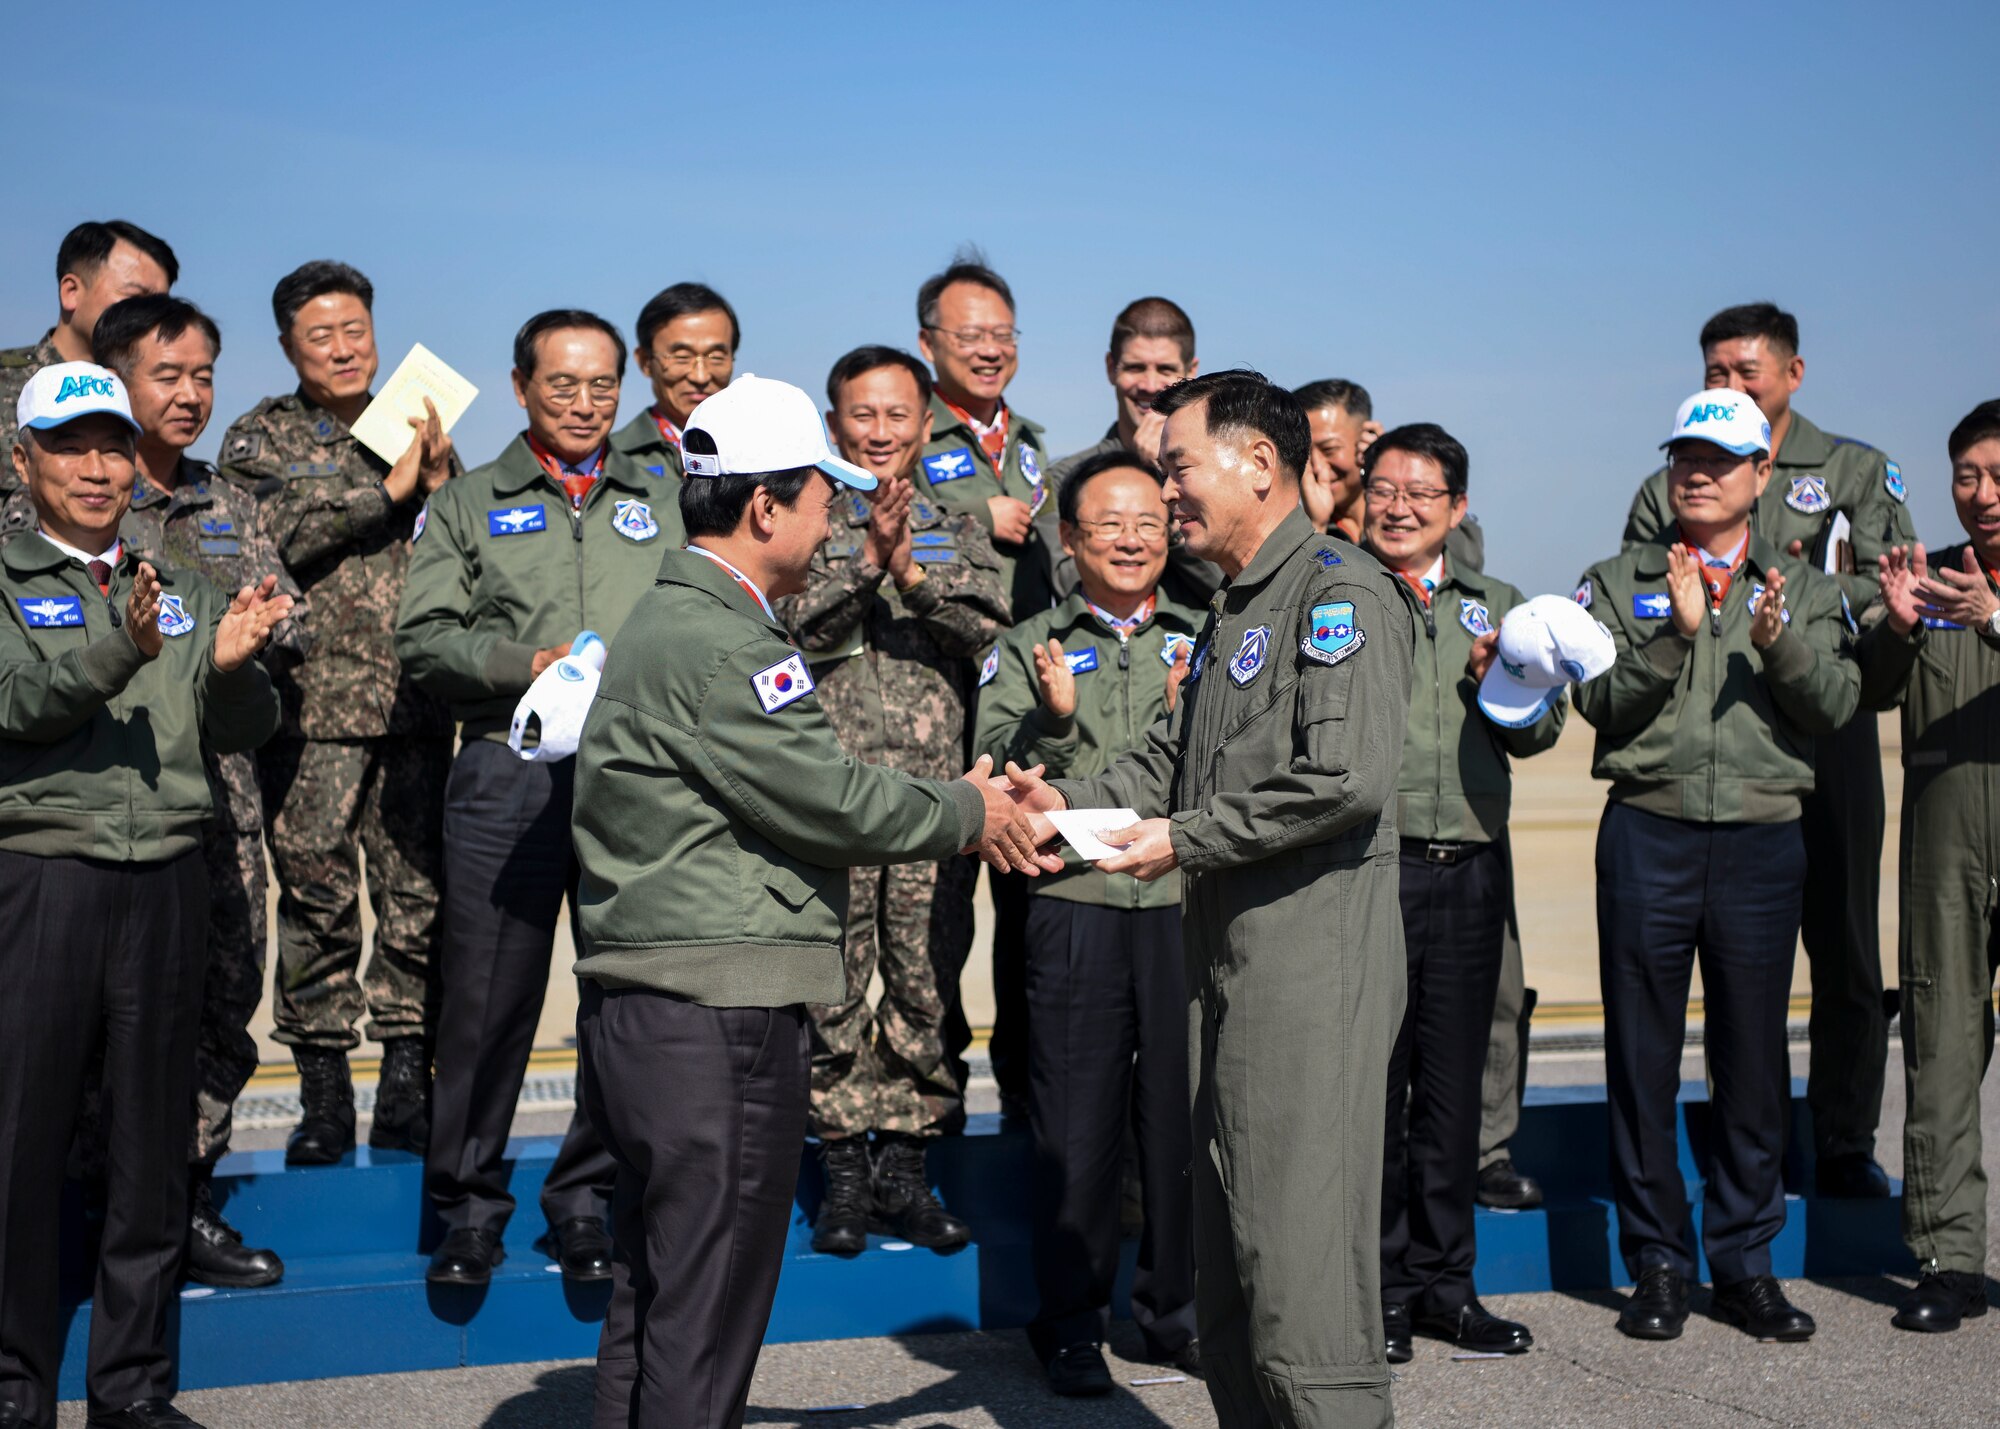 Republic of Korea Air Force Lt. Gen. Lee, Keon Wan, Air Force Operations Command commander, receives a gift from Ahn, Gyubaek, National Defense Committee chairman, at Osan Air Base, ROK, Oct. 25, 2018. Members of Team Osan hosted an aircraft and munitions display for the NDC as part of their ROK AFOC site visit. (U.S. Air Force photo by Airman 1st Class Ilyana A. Escalona)